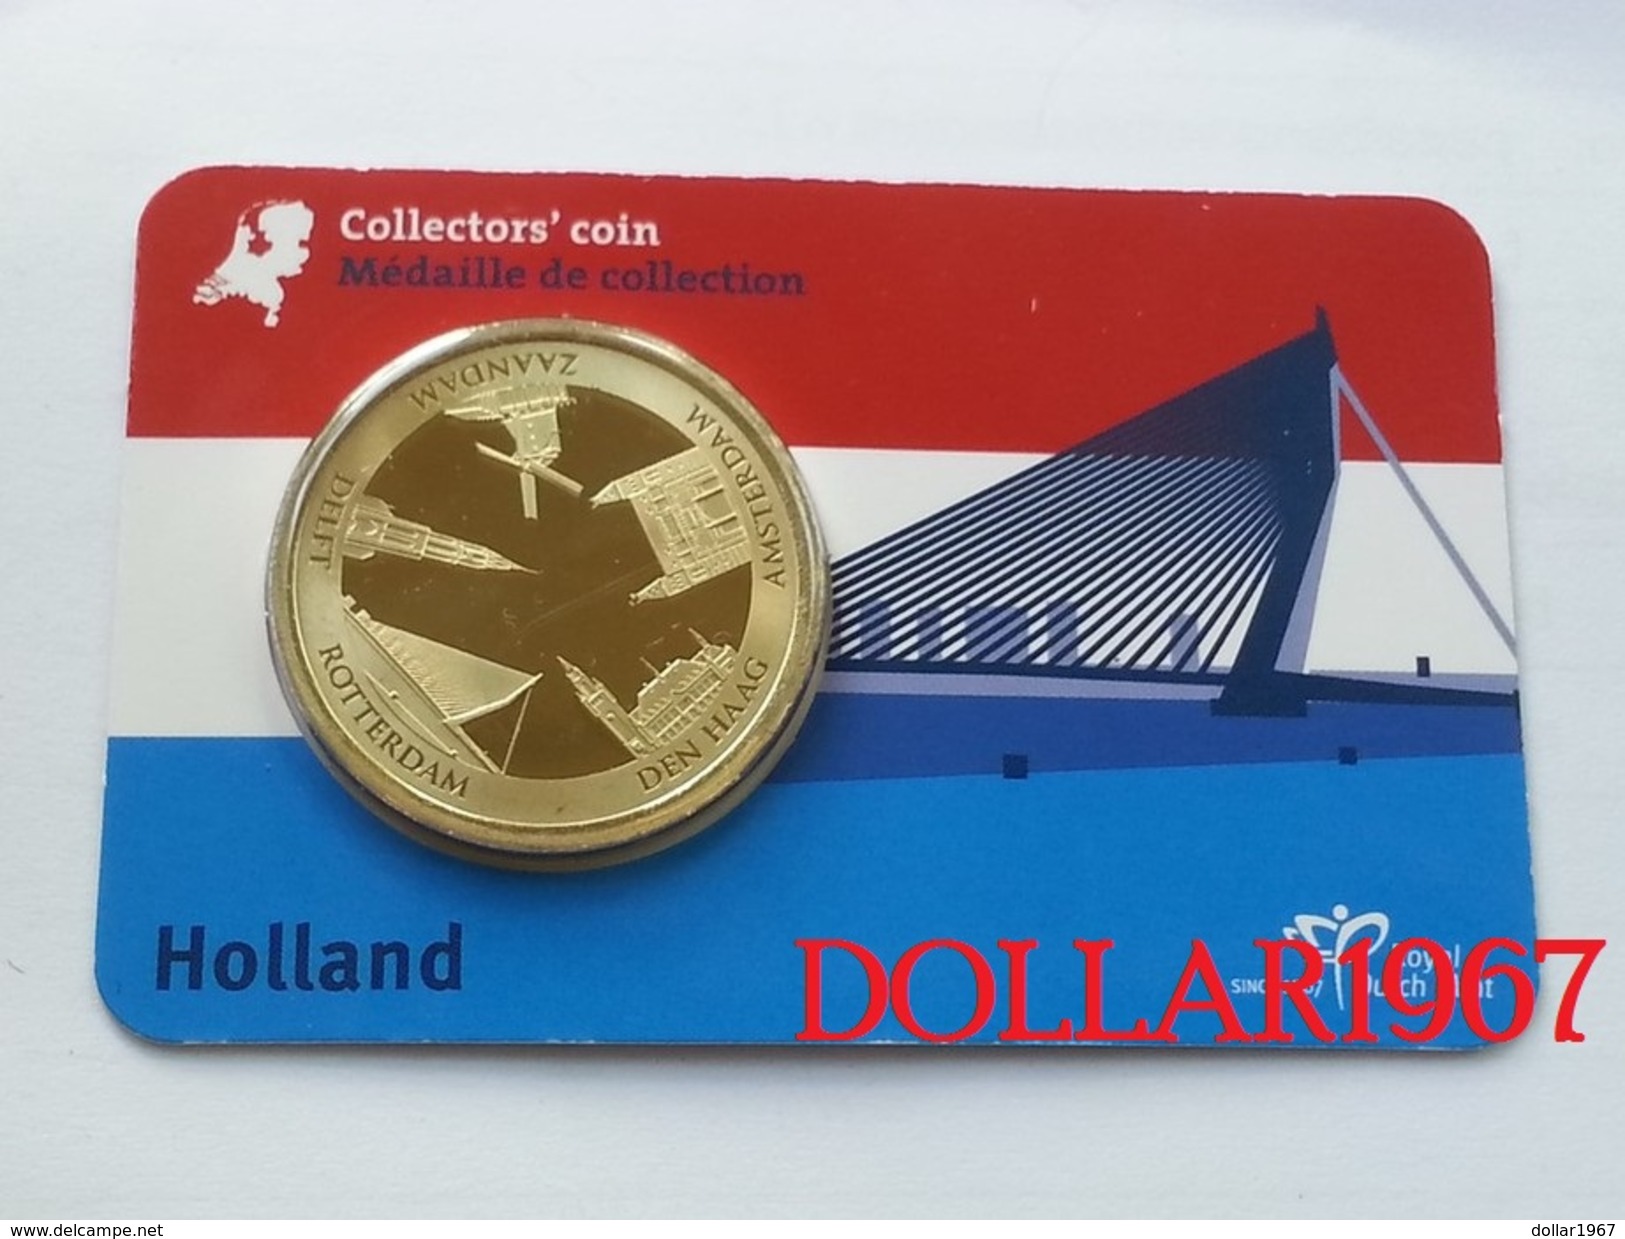 Collectors Coin - Coincard -THE NETHERLANDS &ndash; Panorama  - Pays-Bas - Souvenir-Medaille (elongated Coins)